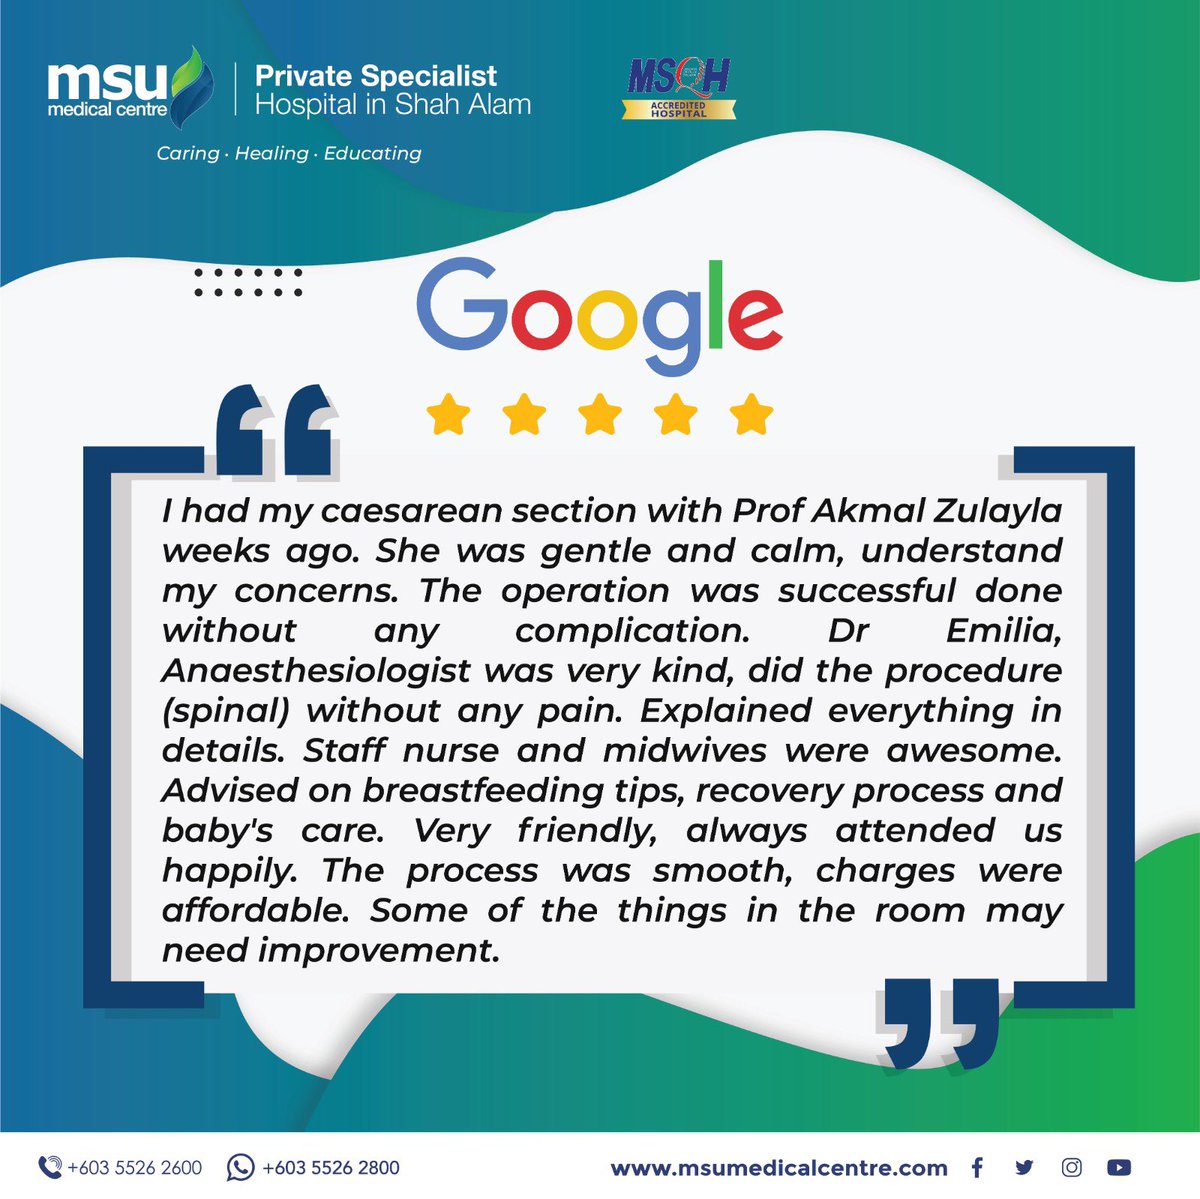 Thank you for rating us 5 stars! We really appreciate it. Feedback and support from you inspire us to keep doing our best. We are glad to assist you in the future.

#CaringHealingEducating 
#MSUMC 
#PrivateSpecialistHospita
#HospitalInShahAlam